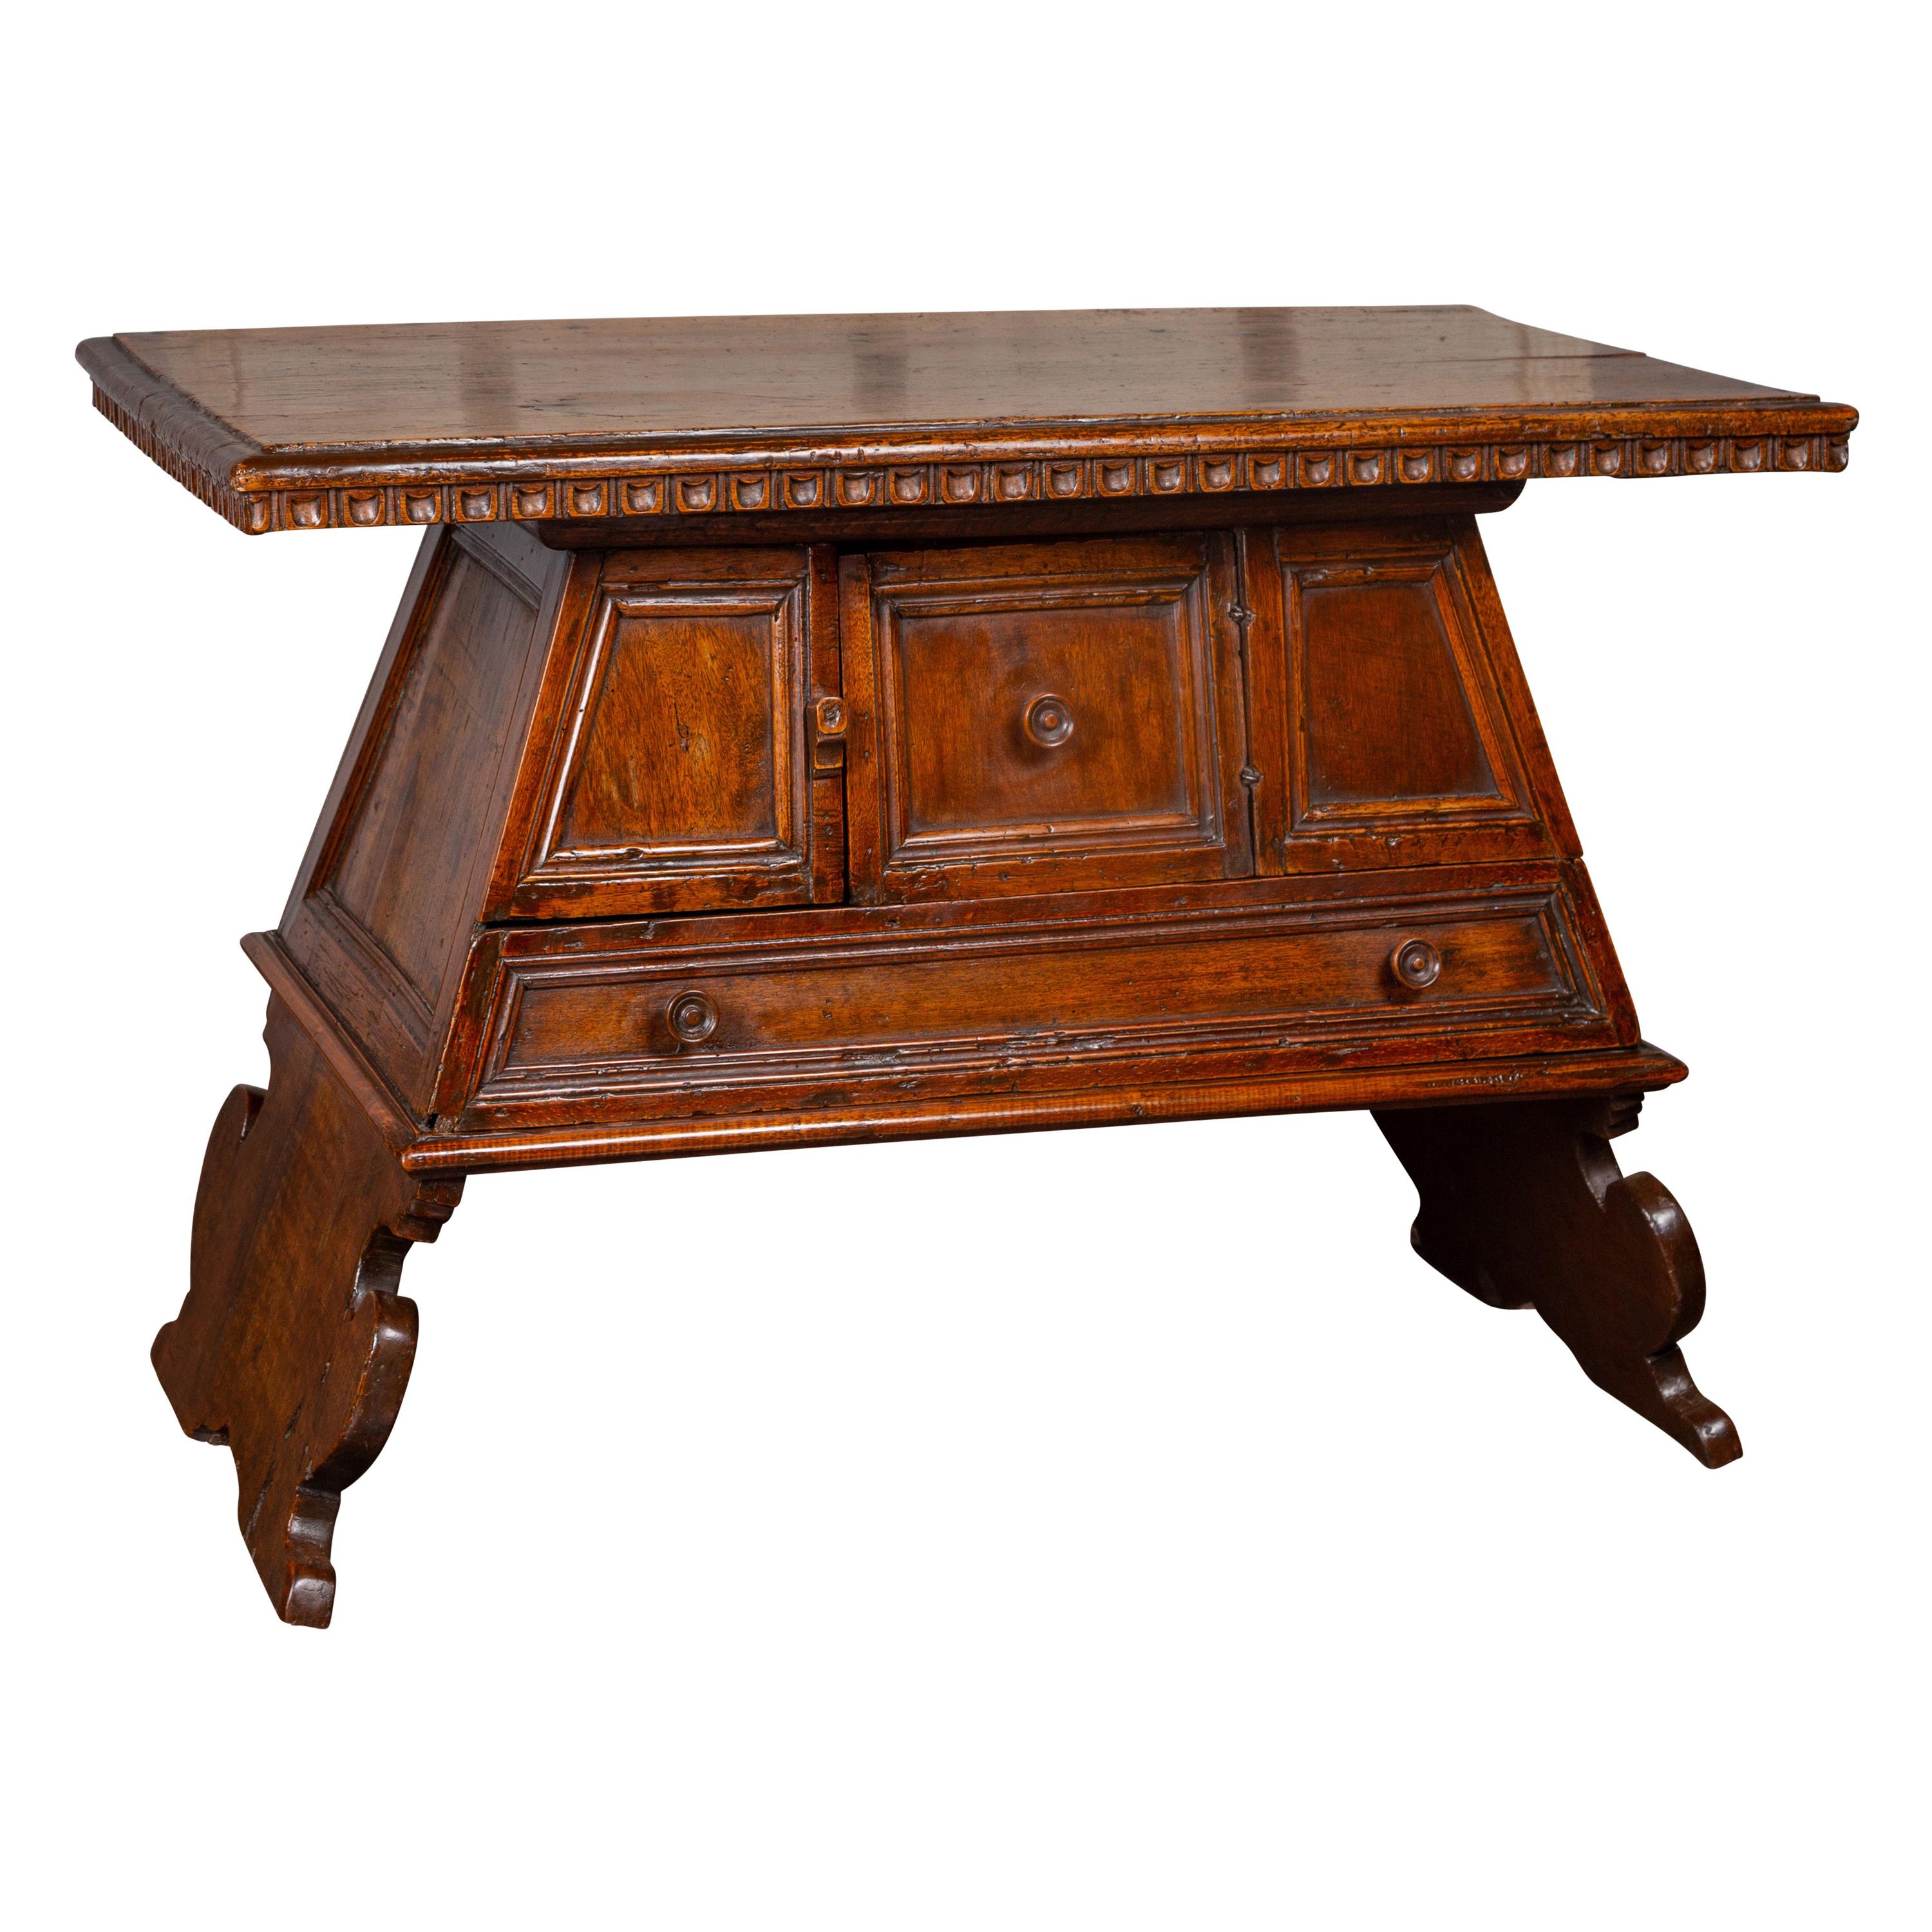 Italian 1800s Walnut Console Cabinet with Scoop Motifs, Doors and Single Drawer